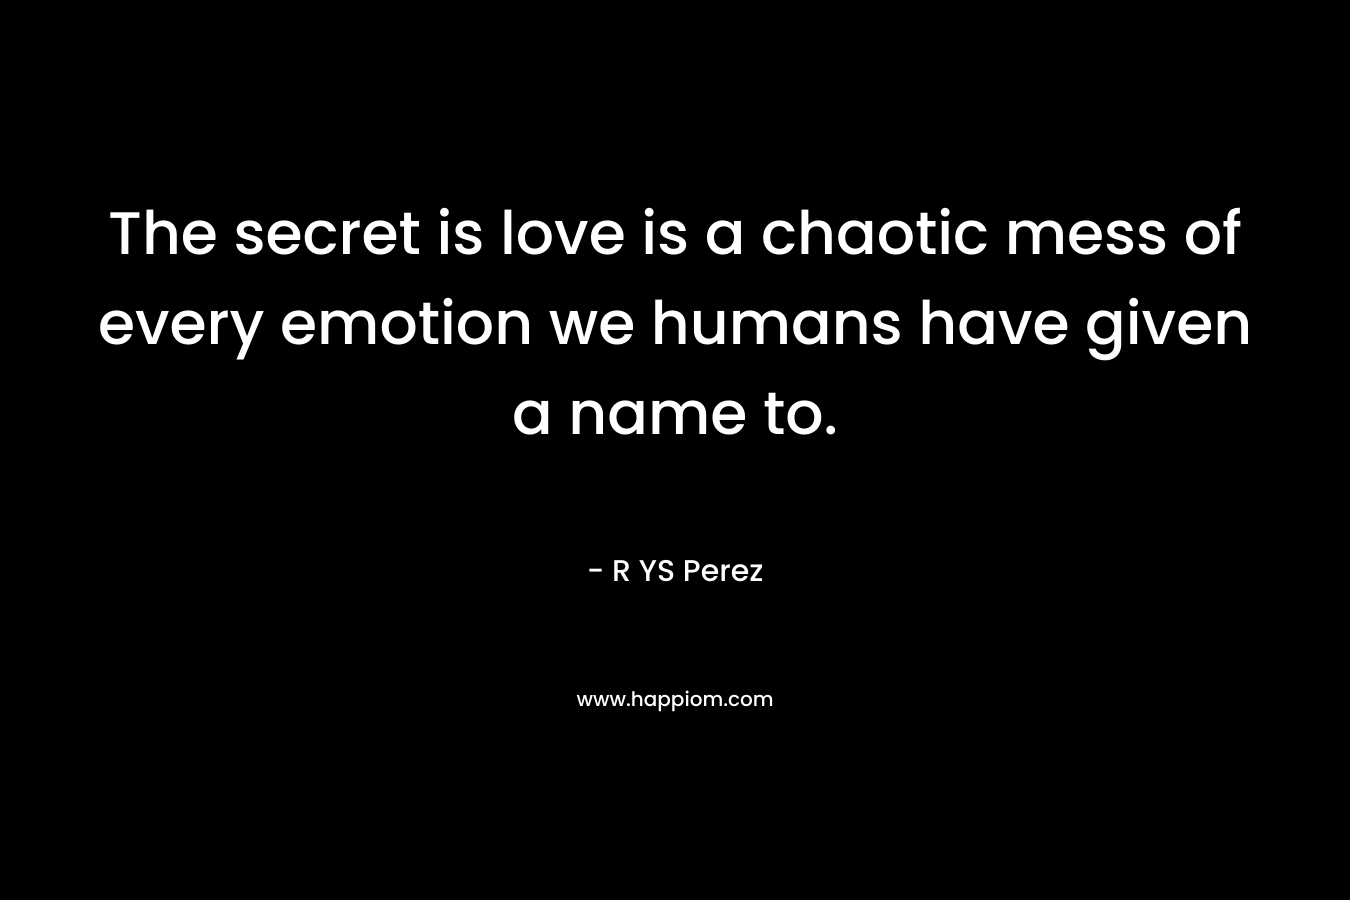 The secret is love is a chaotic mess of every emotion we humans have given a name to. – R YS Perez